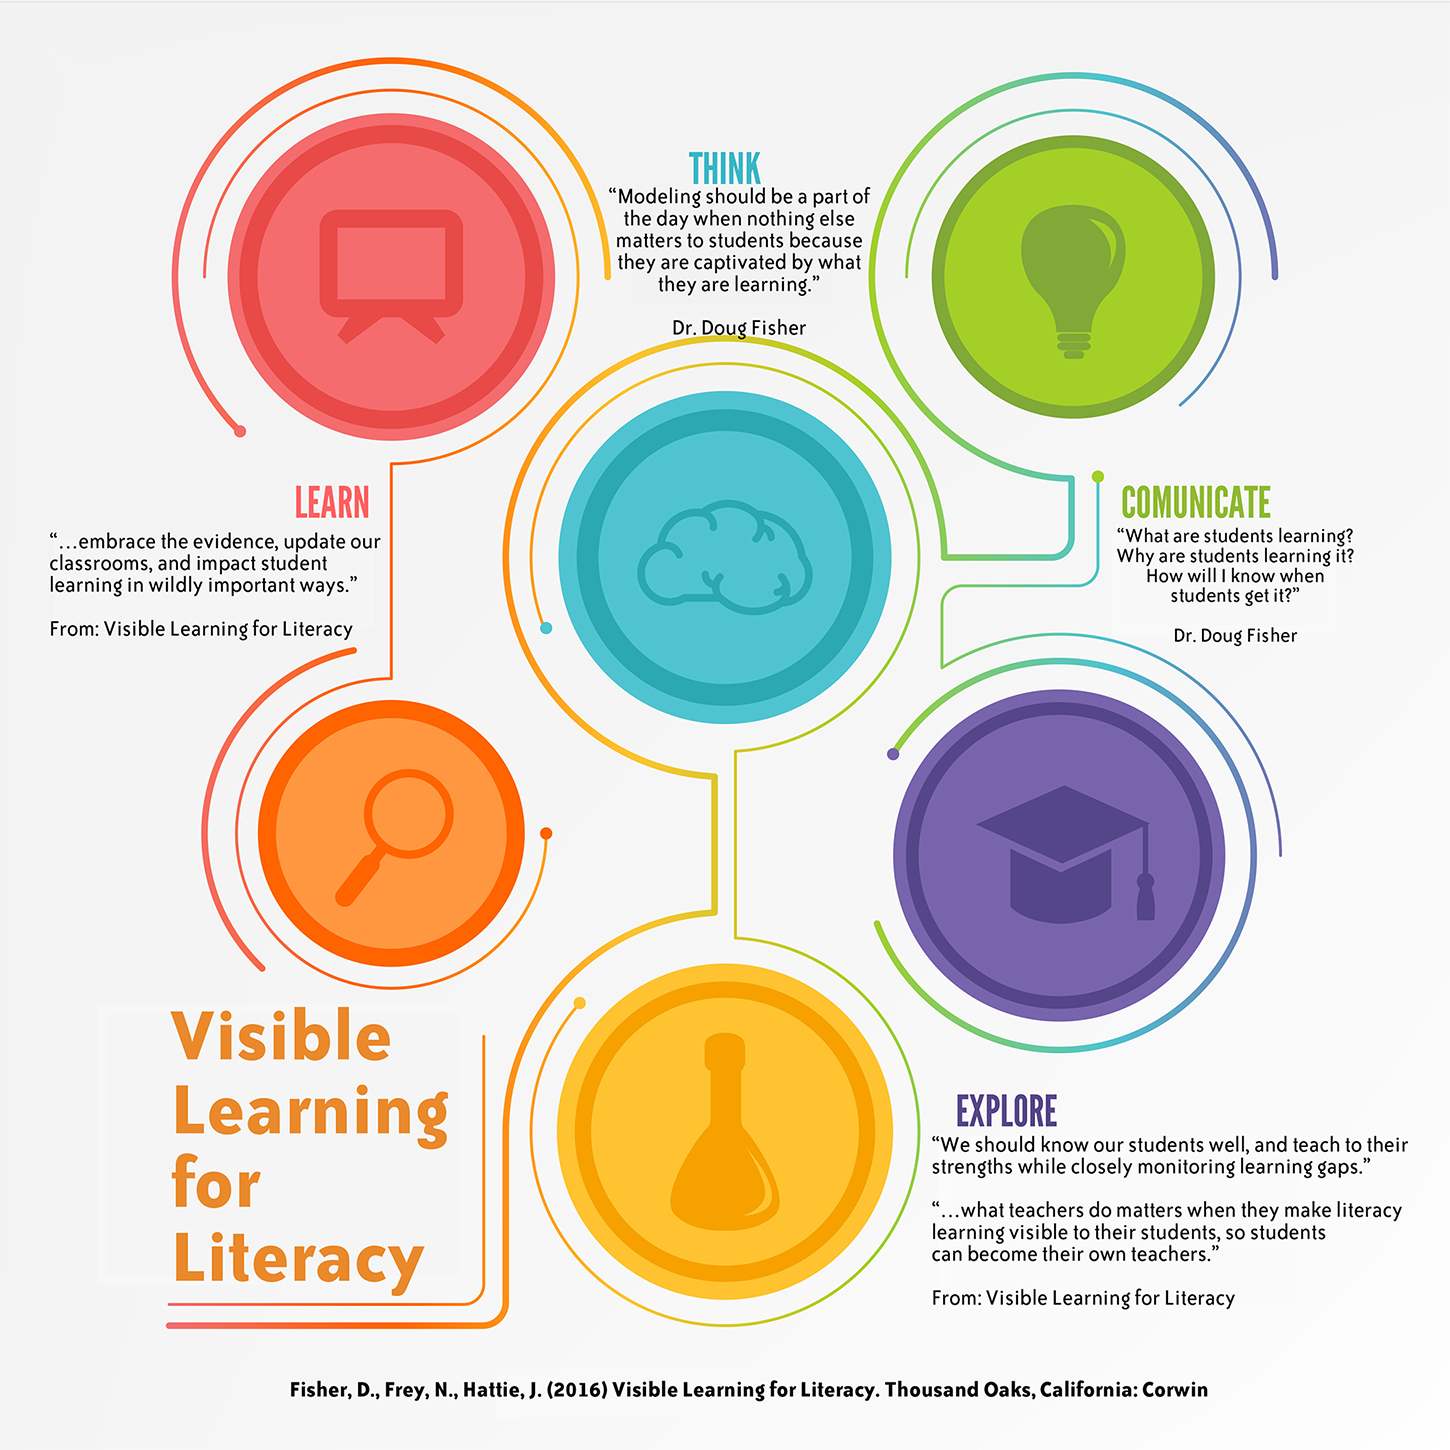 Top Takeaways: Visible Learning for Literacy